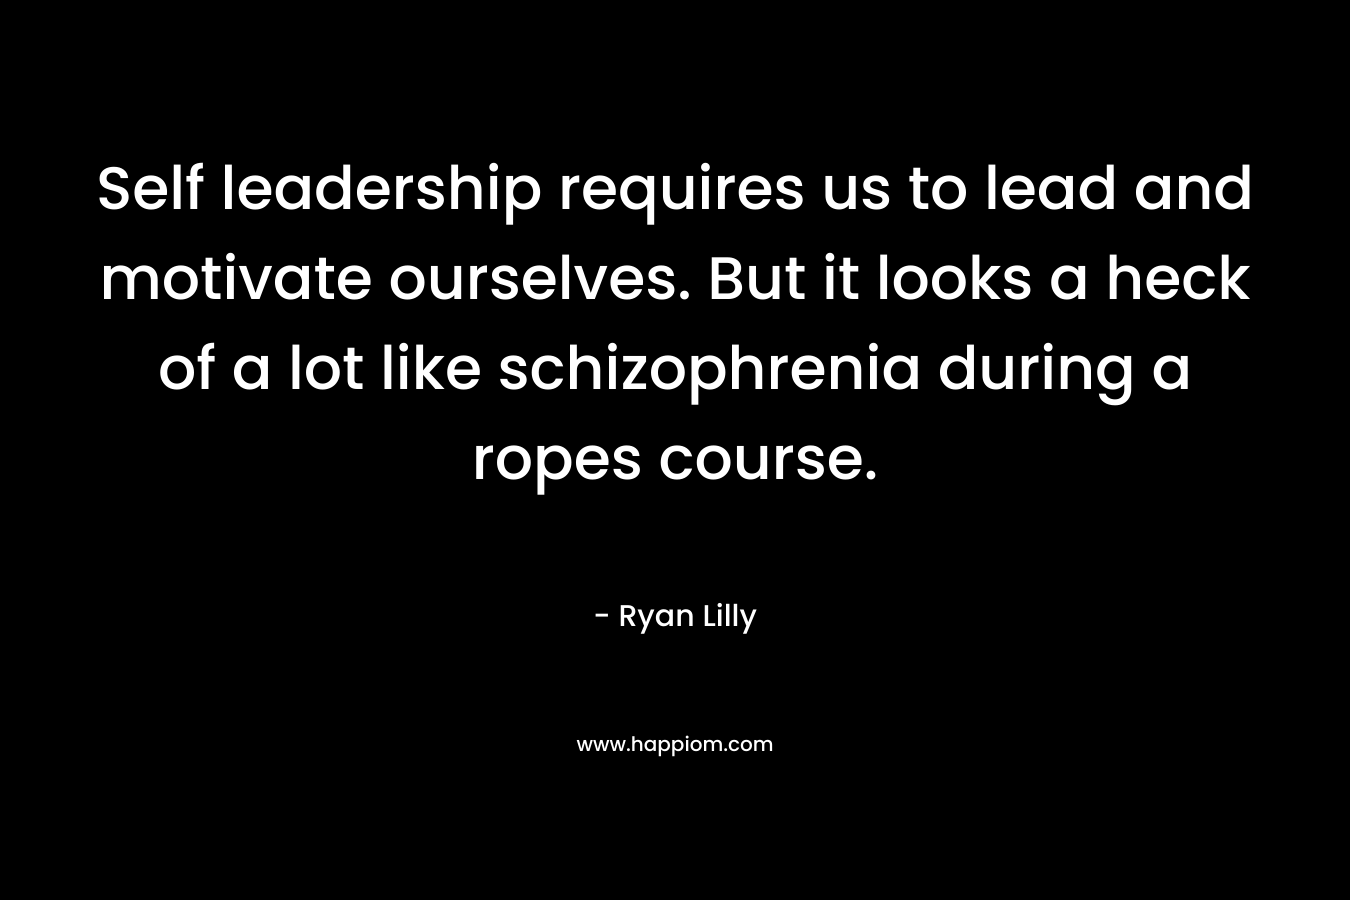 Self leadership requires us to lead and motivate ourselves. But it looks a heck of a lot like schizophrenia during a ropes course. – Ryan Lilly